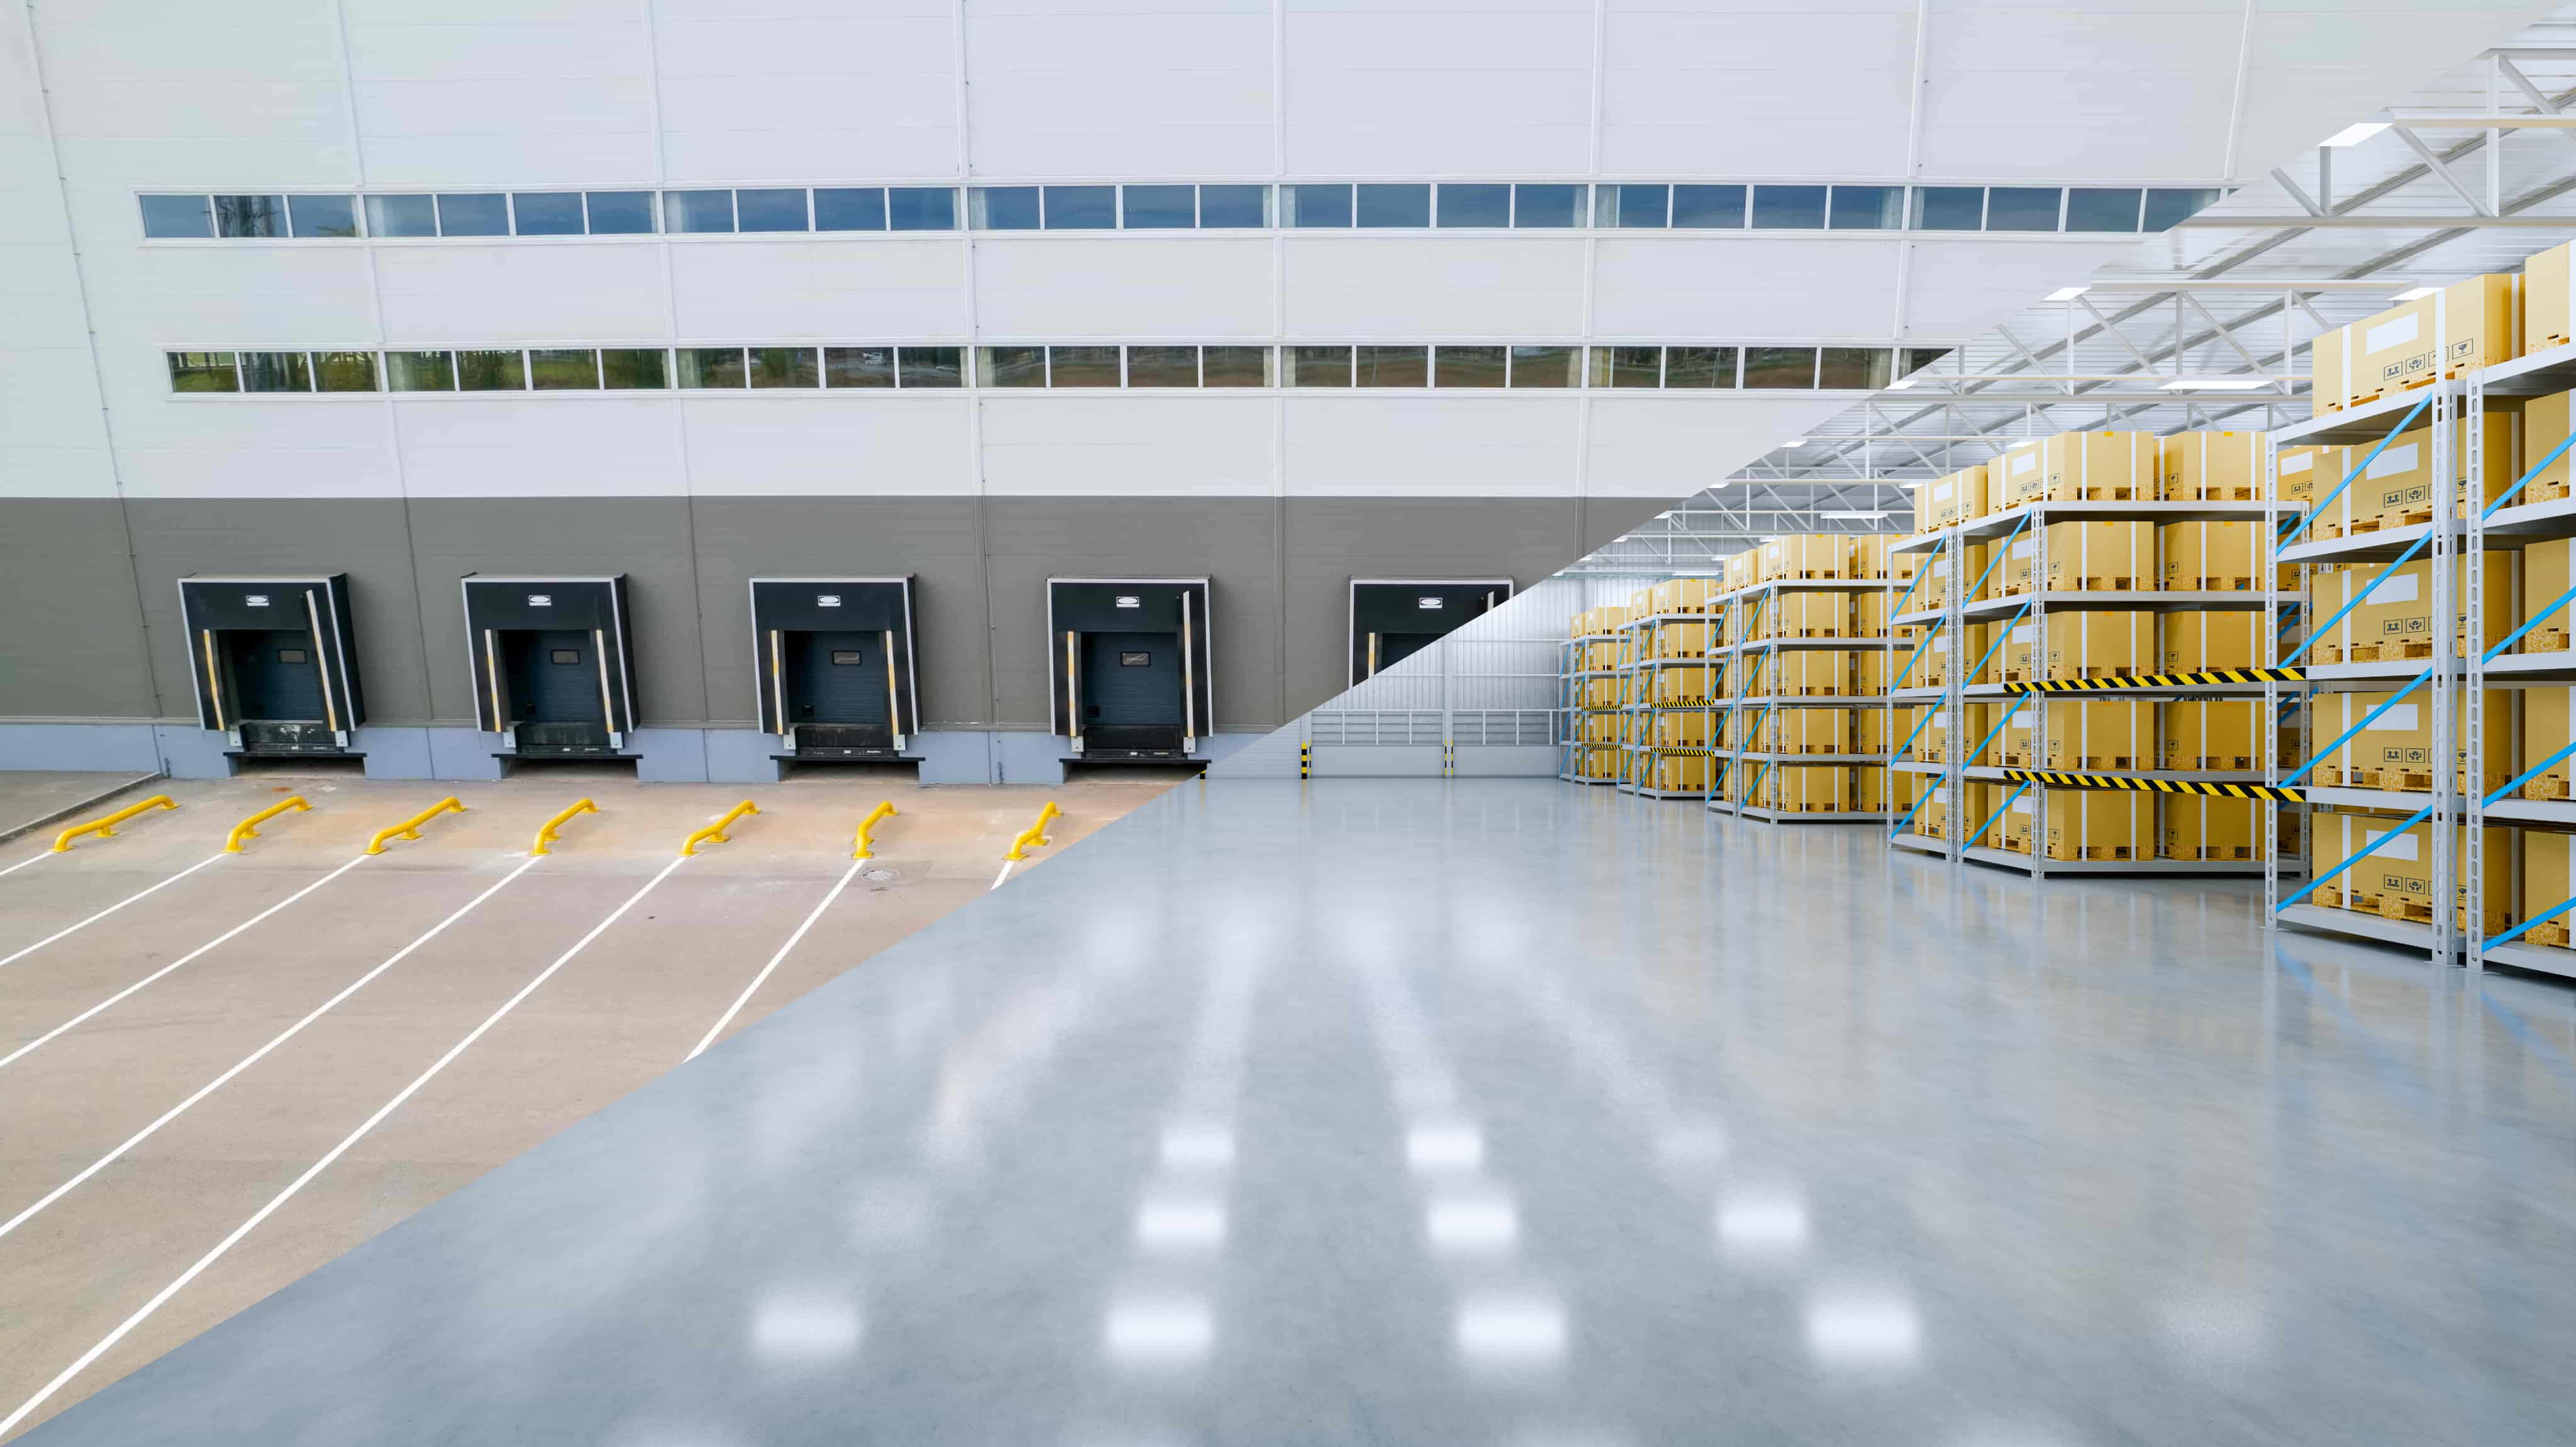 Fulfillment center and warehouse—What is the difference?